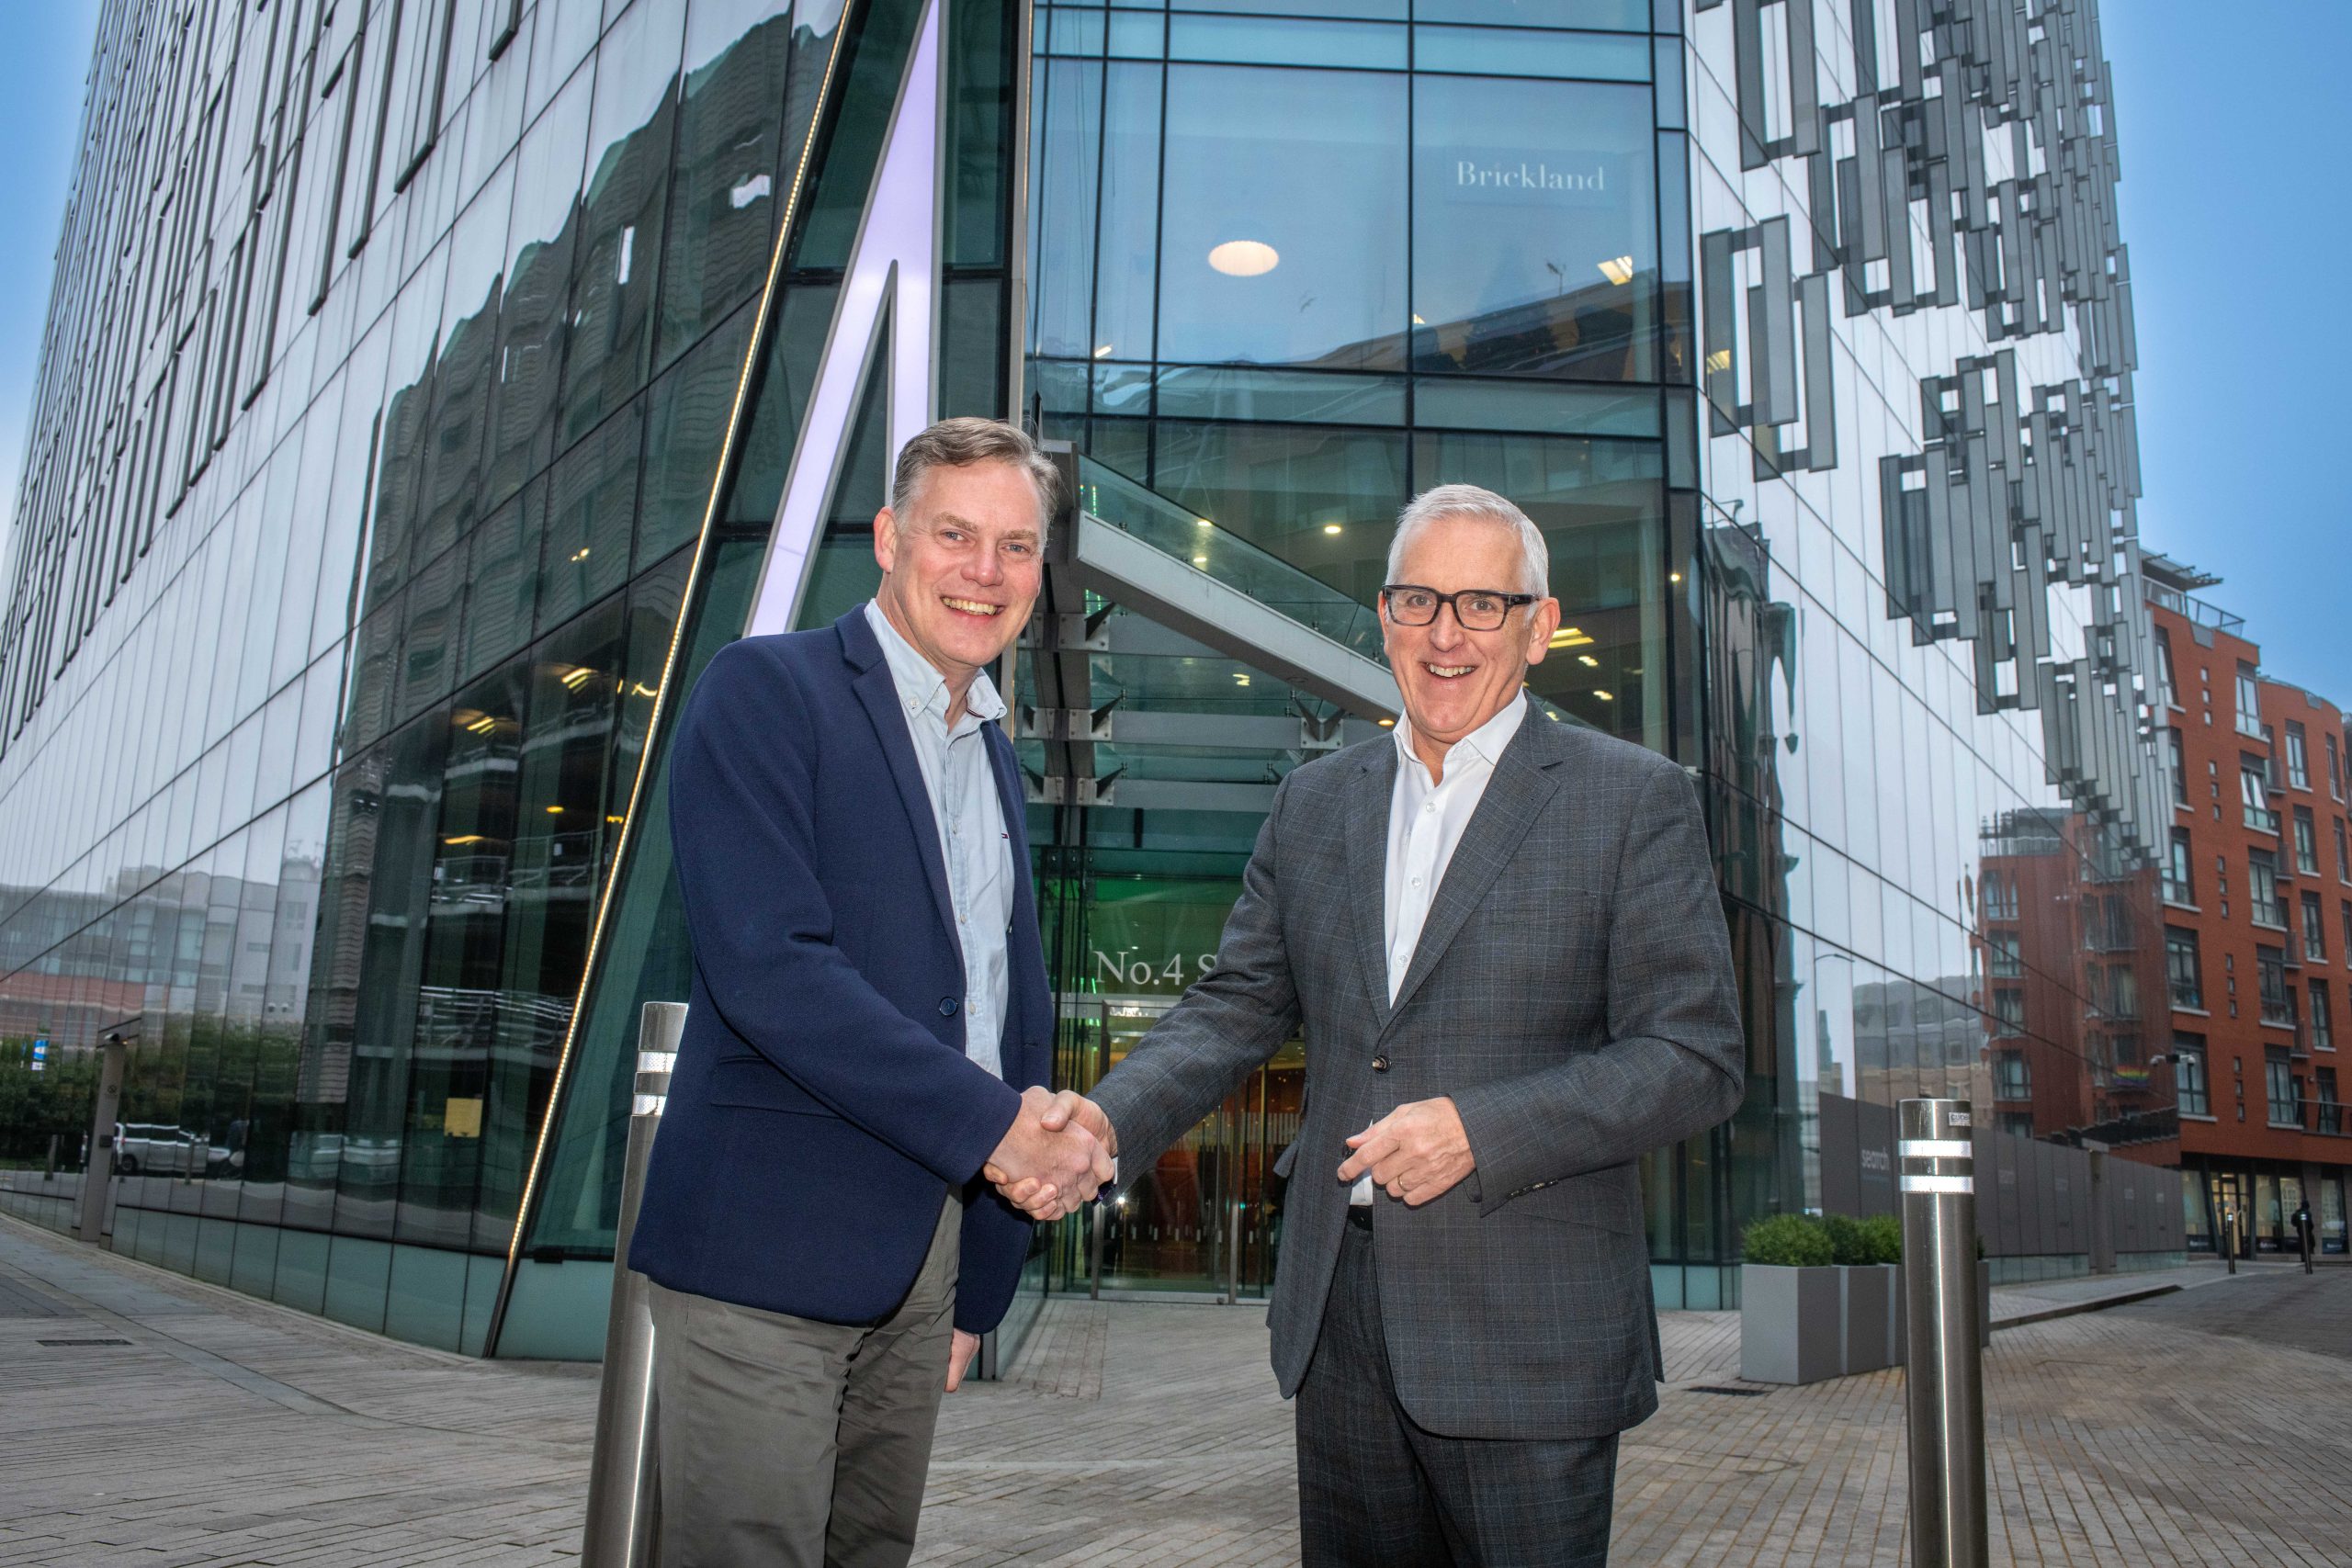 l-r: Chair of Liverpool Place Partnership, Stephen Cowperthwaite and CEO of Liverpool BID Company, Bill Addy